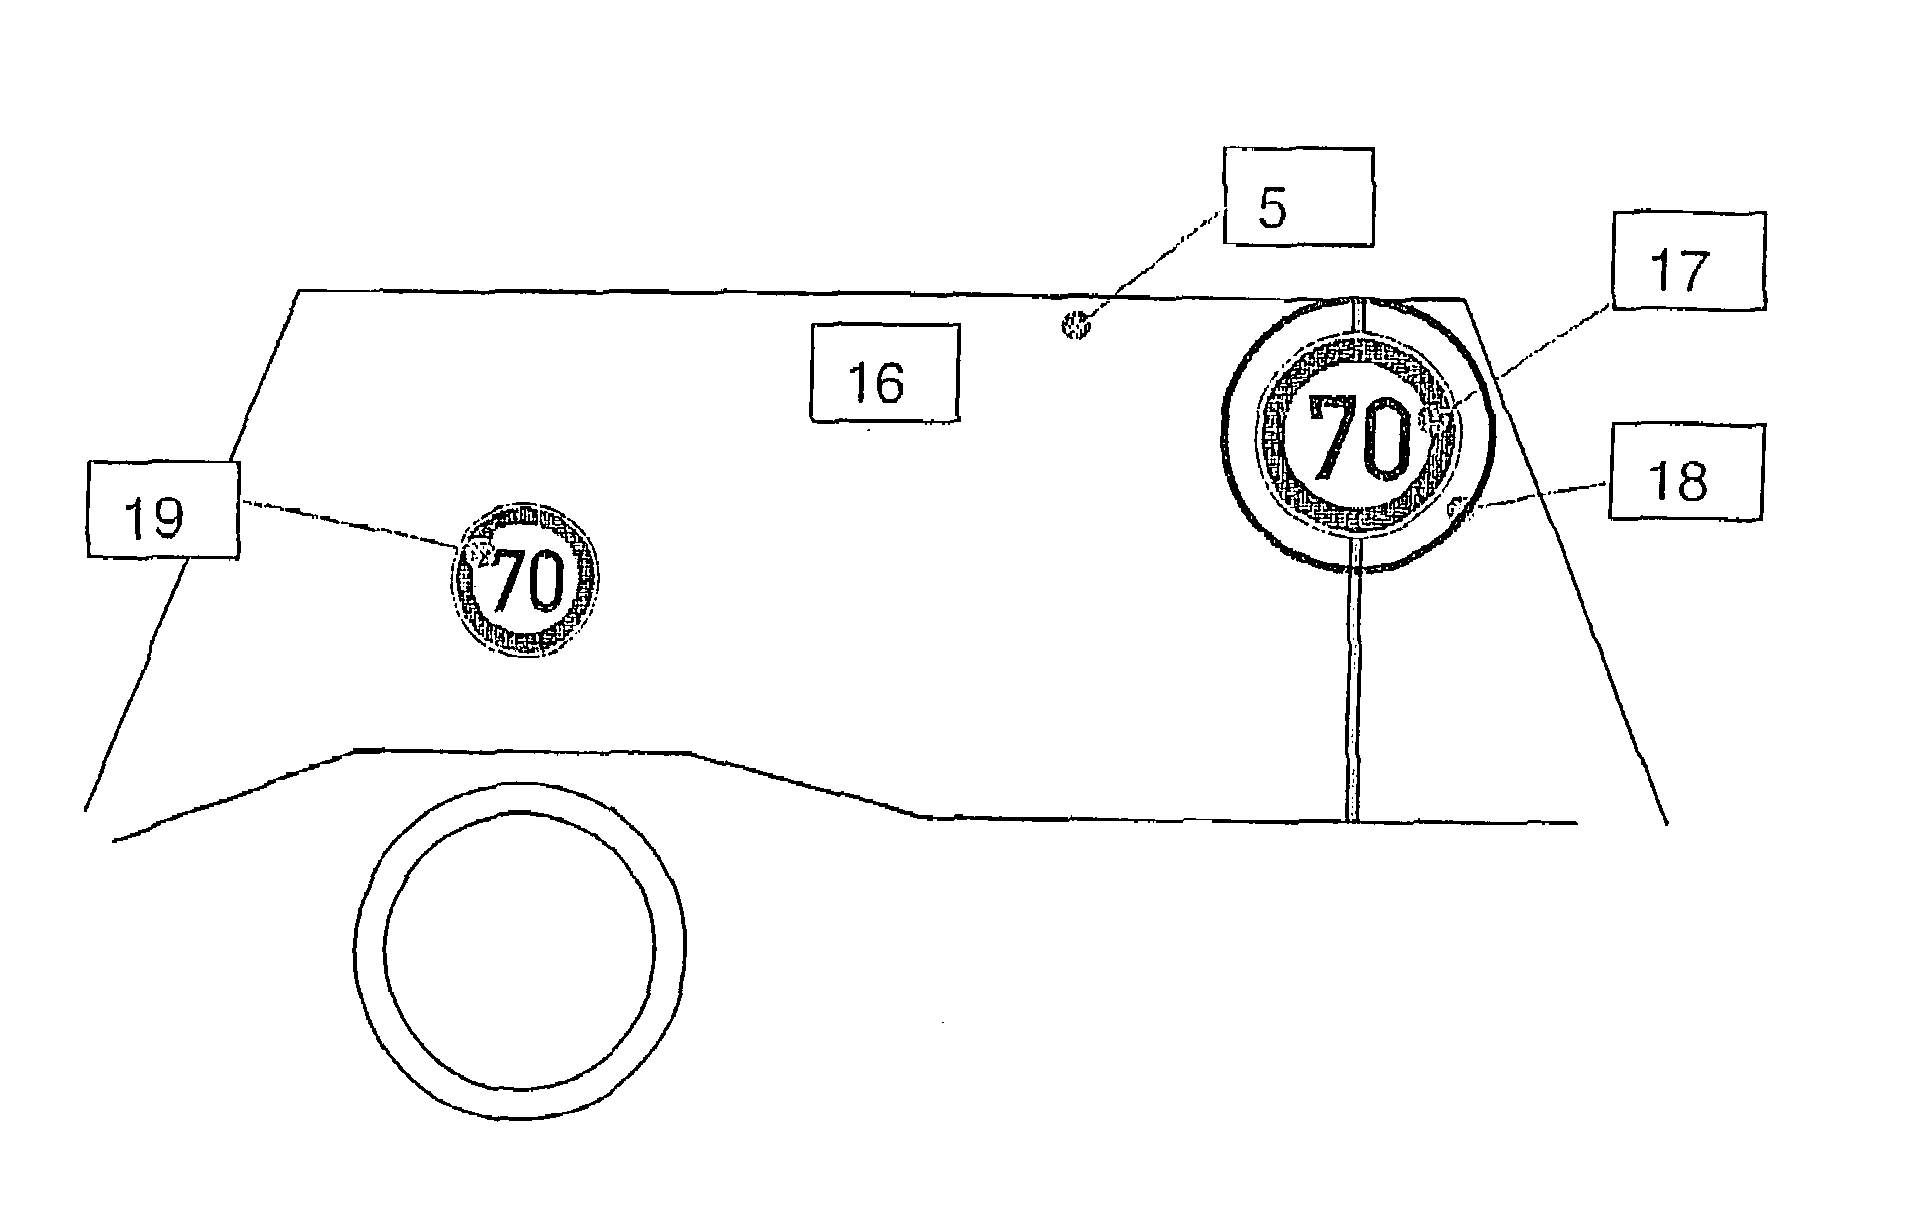 Head-up display system and method for carrying out the location-correct display of an object situated outside a vehicle with regard to the position of the driver